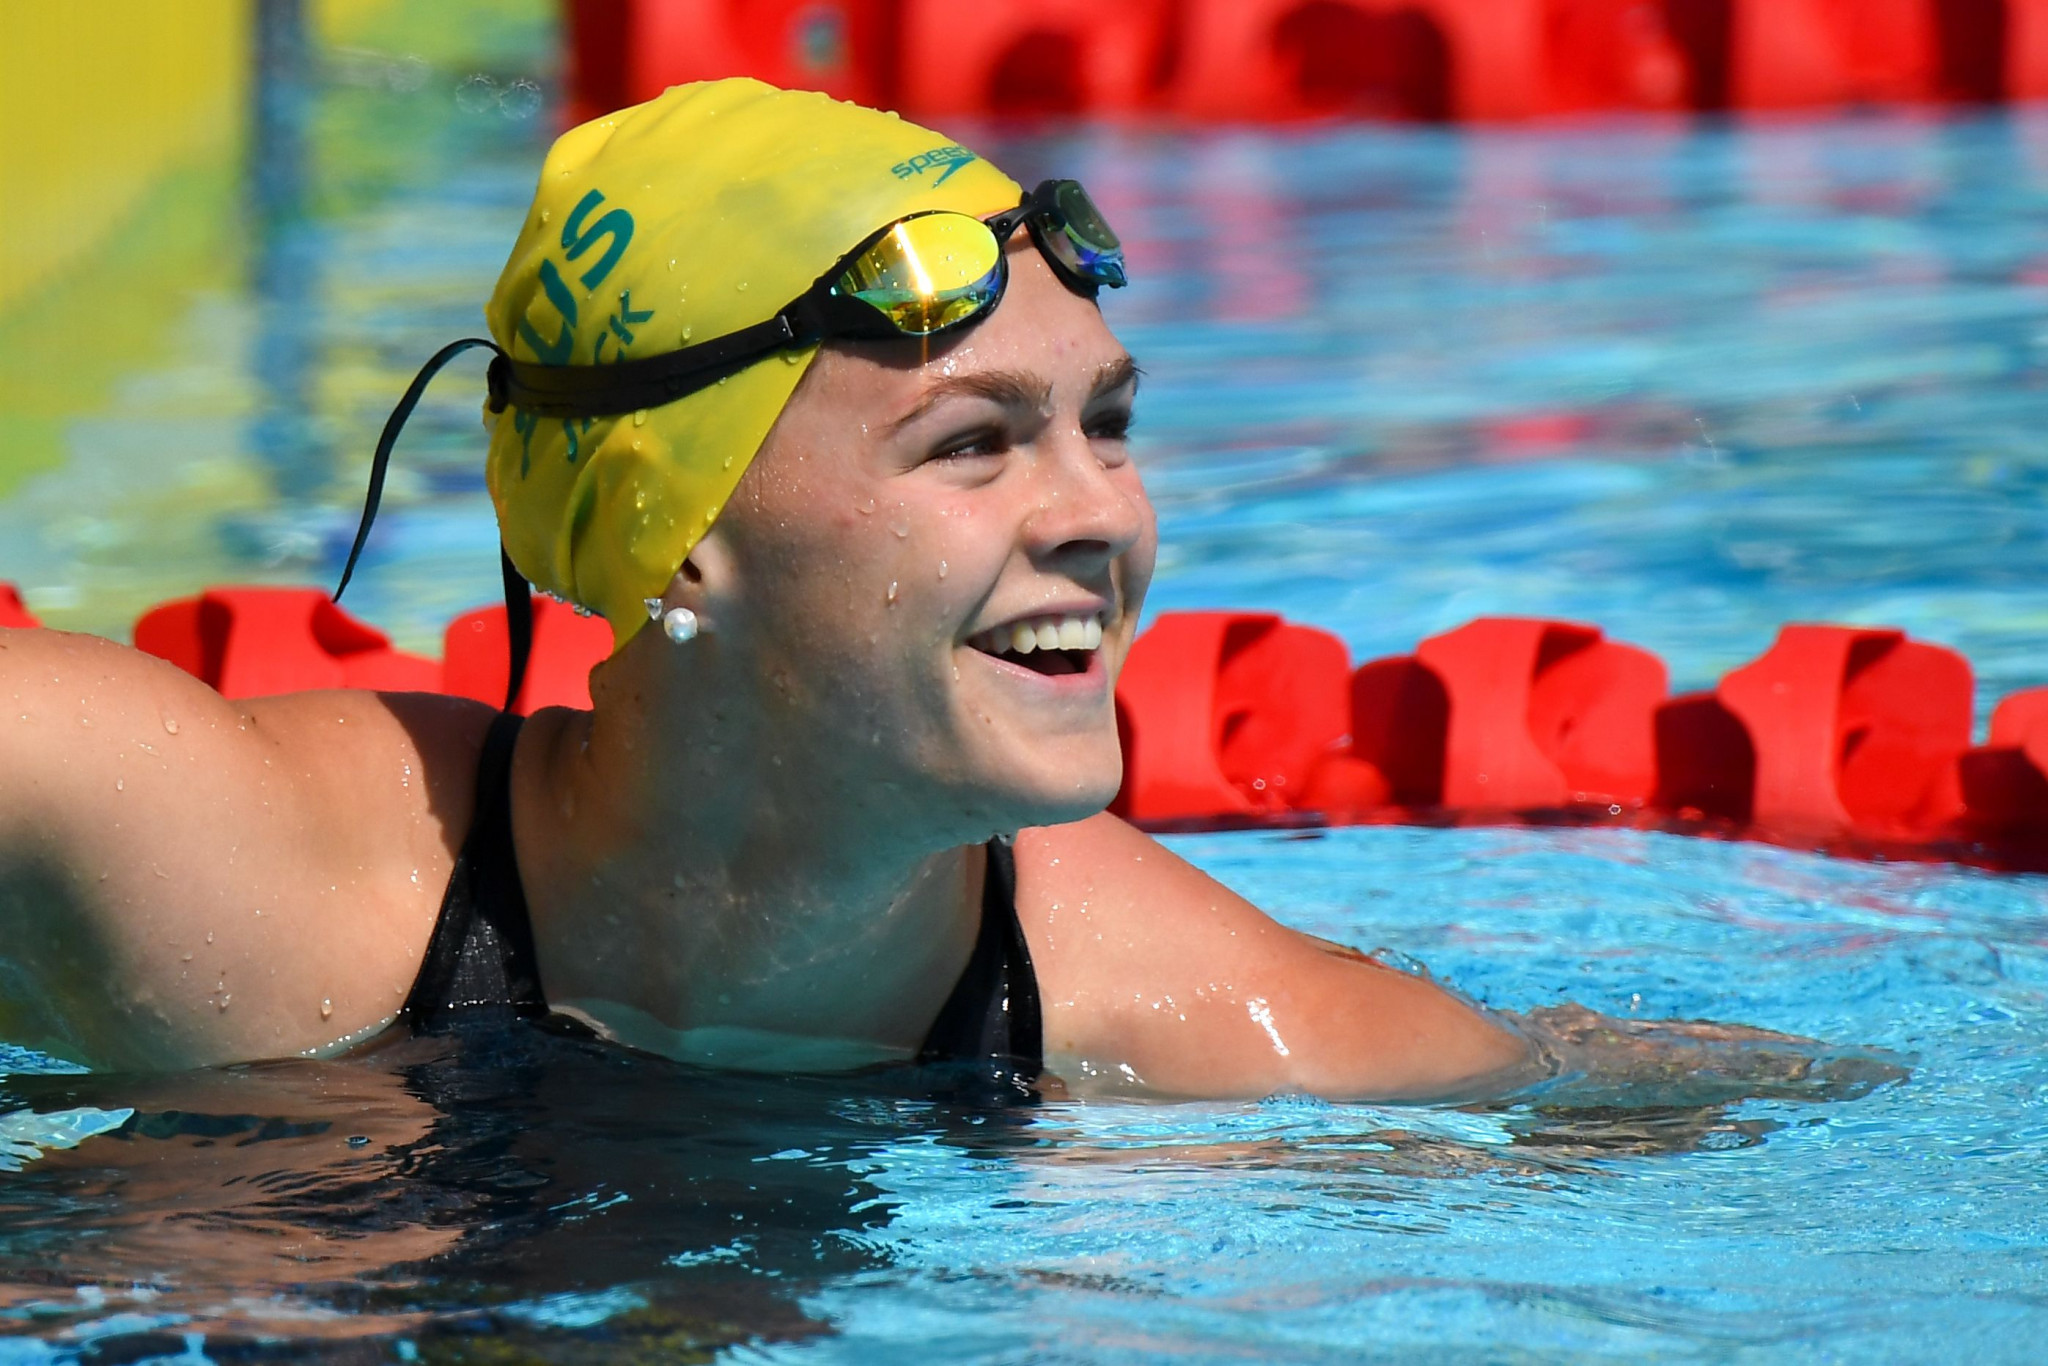 Australia's Shayna Jack has failed a drugs test, she has admitted, but claims she did not take it intentionally ©Getty Images